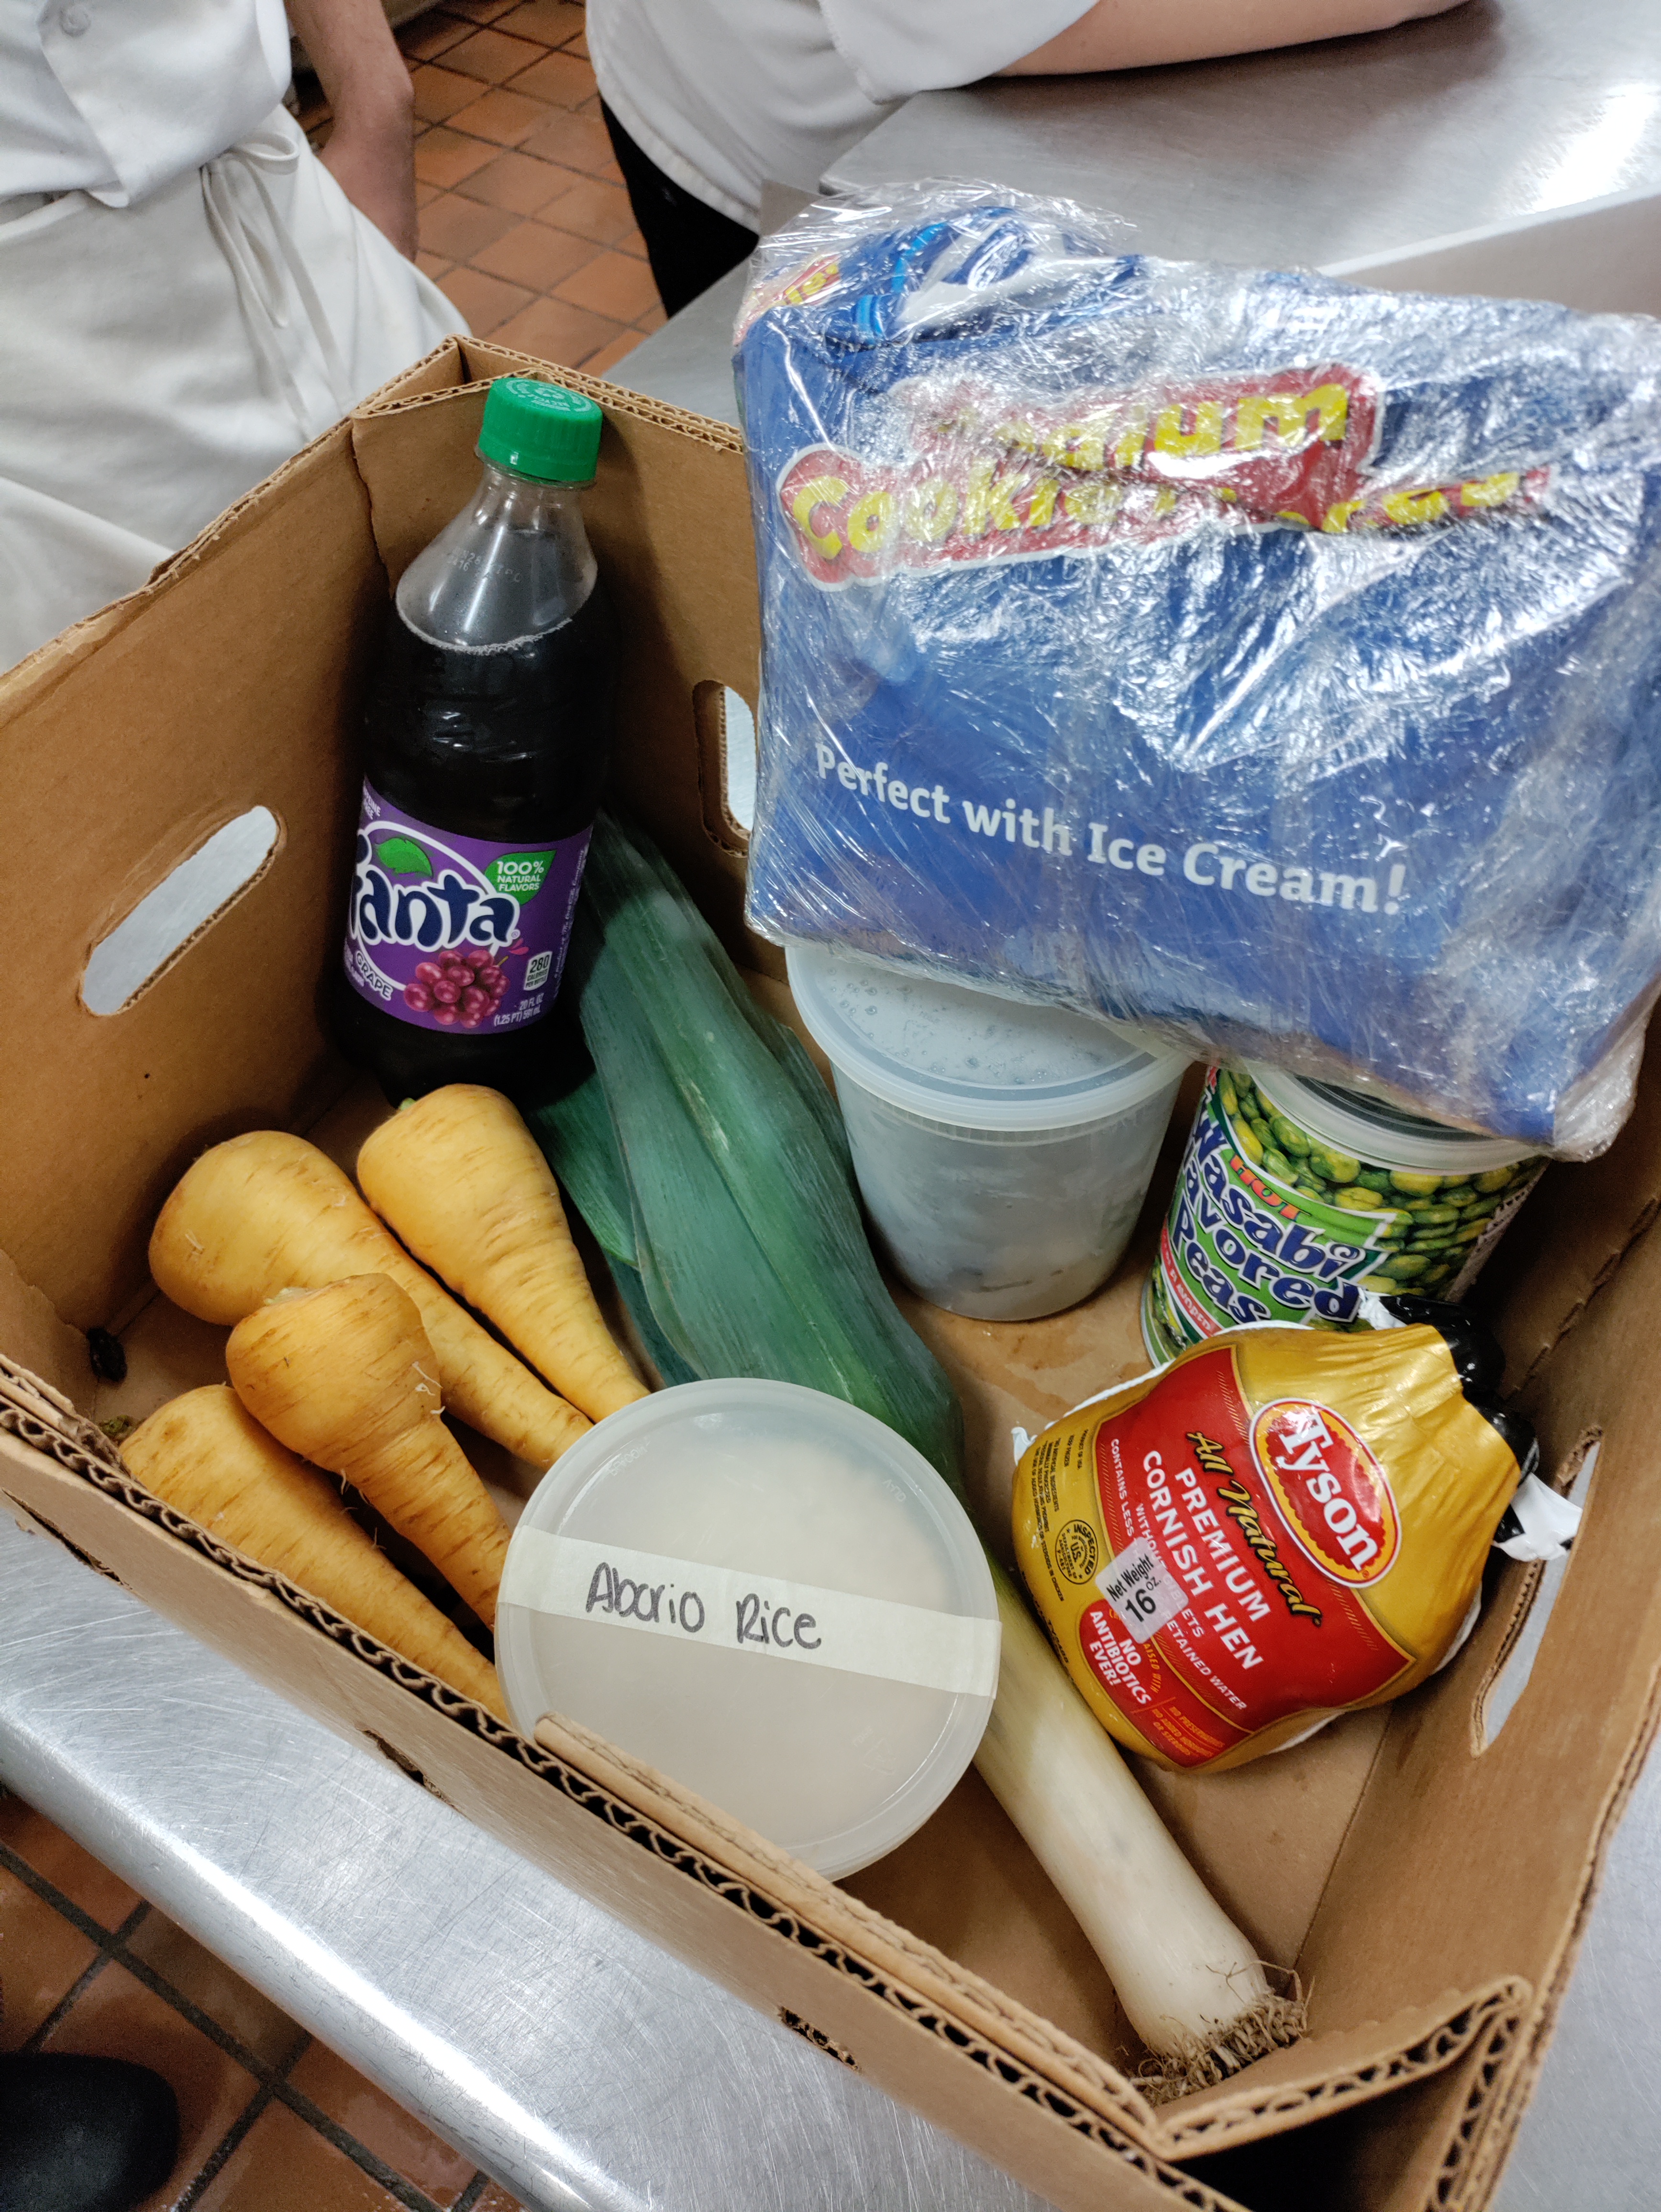 a cardboard box filled with various food items including four parsnips, one leek, a labelled container of arborio rice, a bottle of grape fanta, a cornish hen, a container of shrimp, a bag of oreo pieces, and a can of wasabi peas